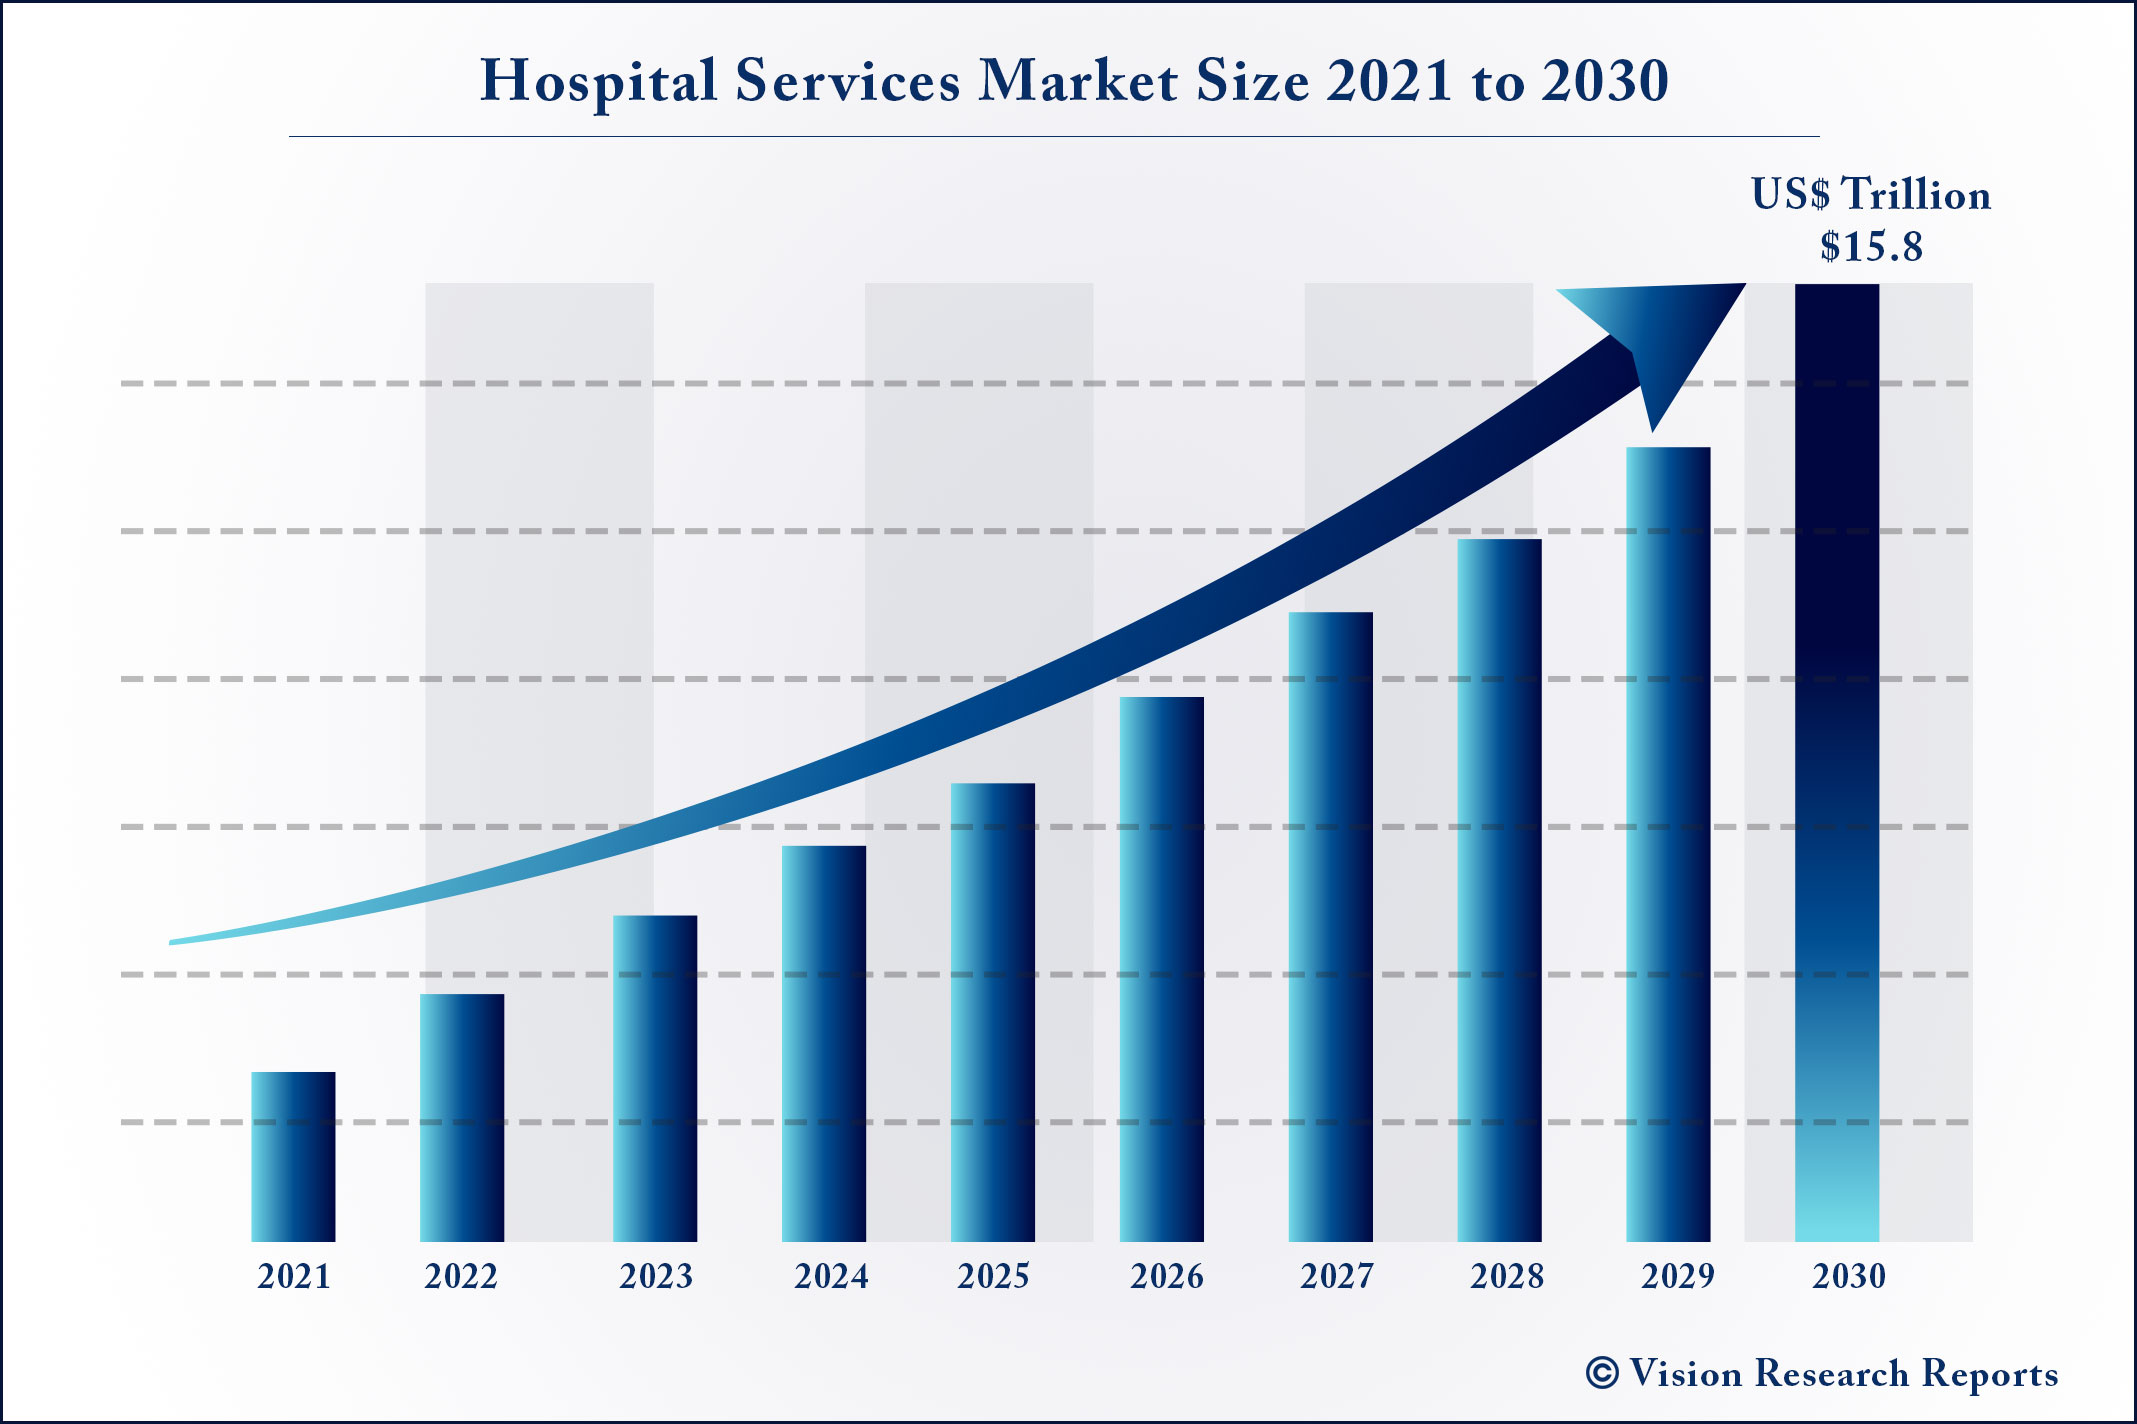 Hospital Services Market Size 2021 to 2030